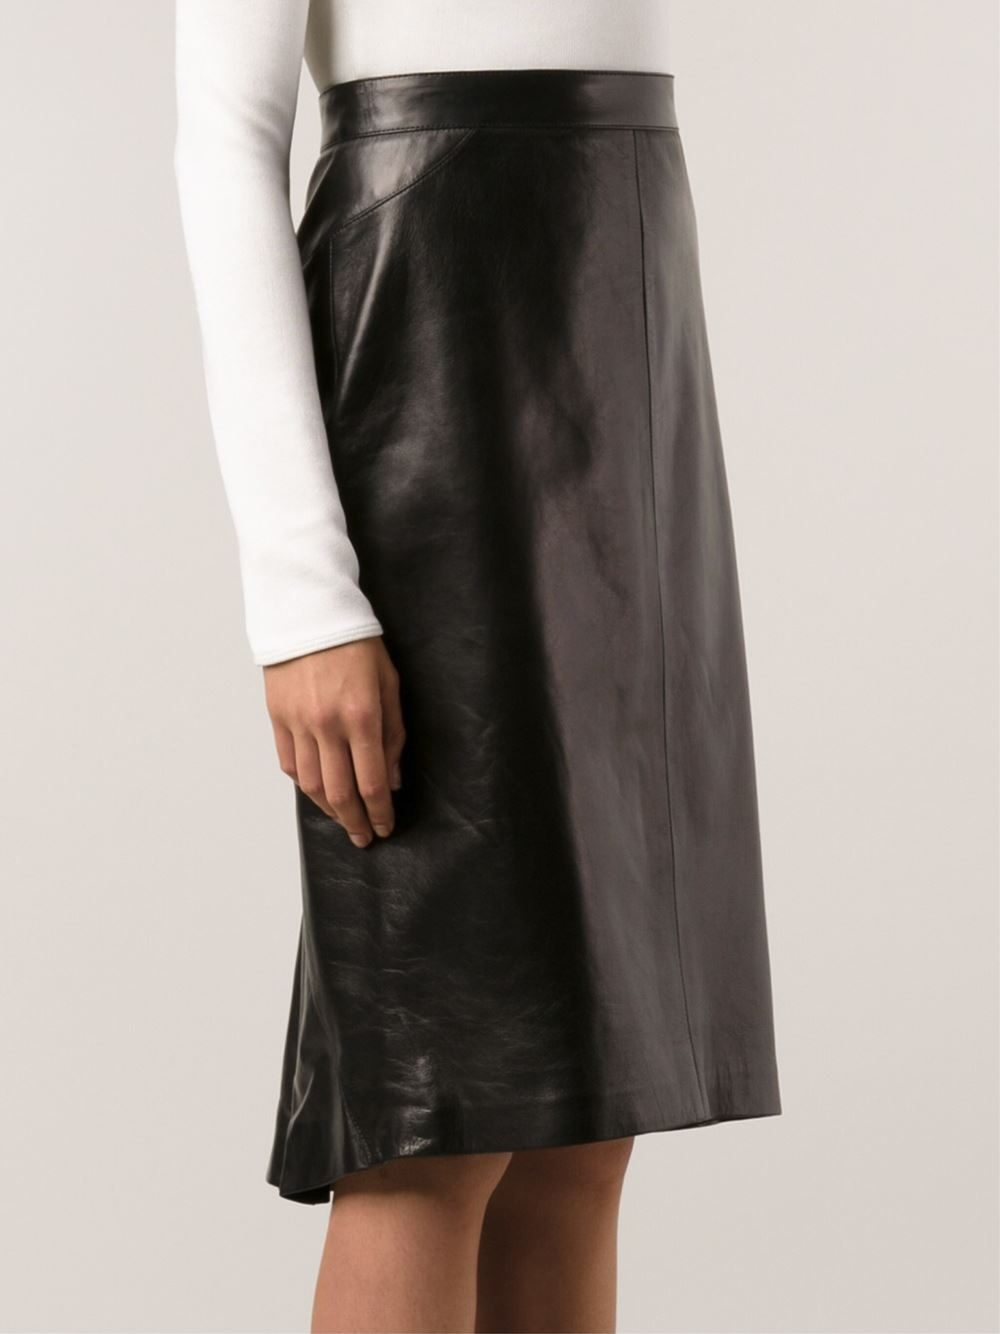 Givenchy Fishtail Leather Skirt in Black | Lyst